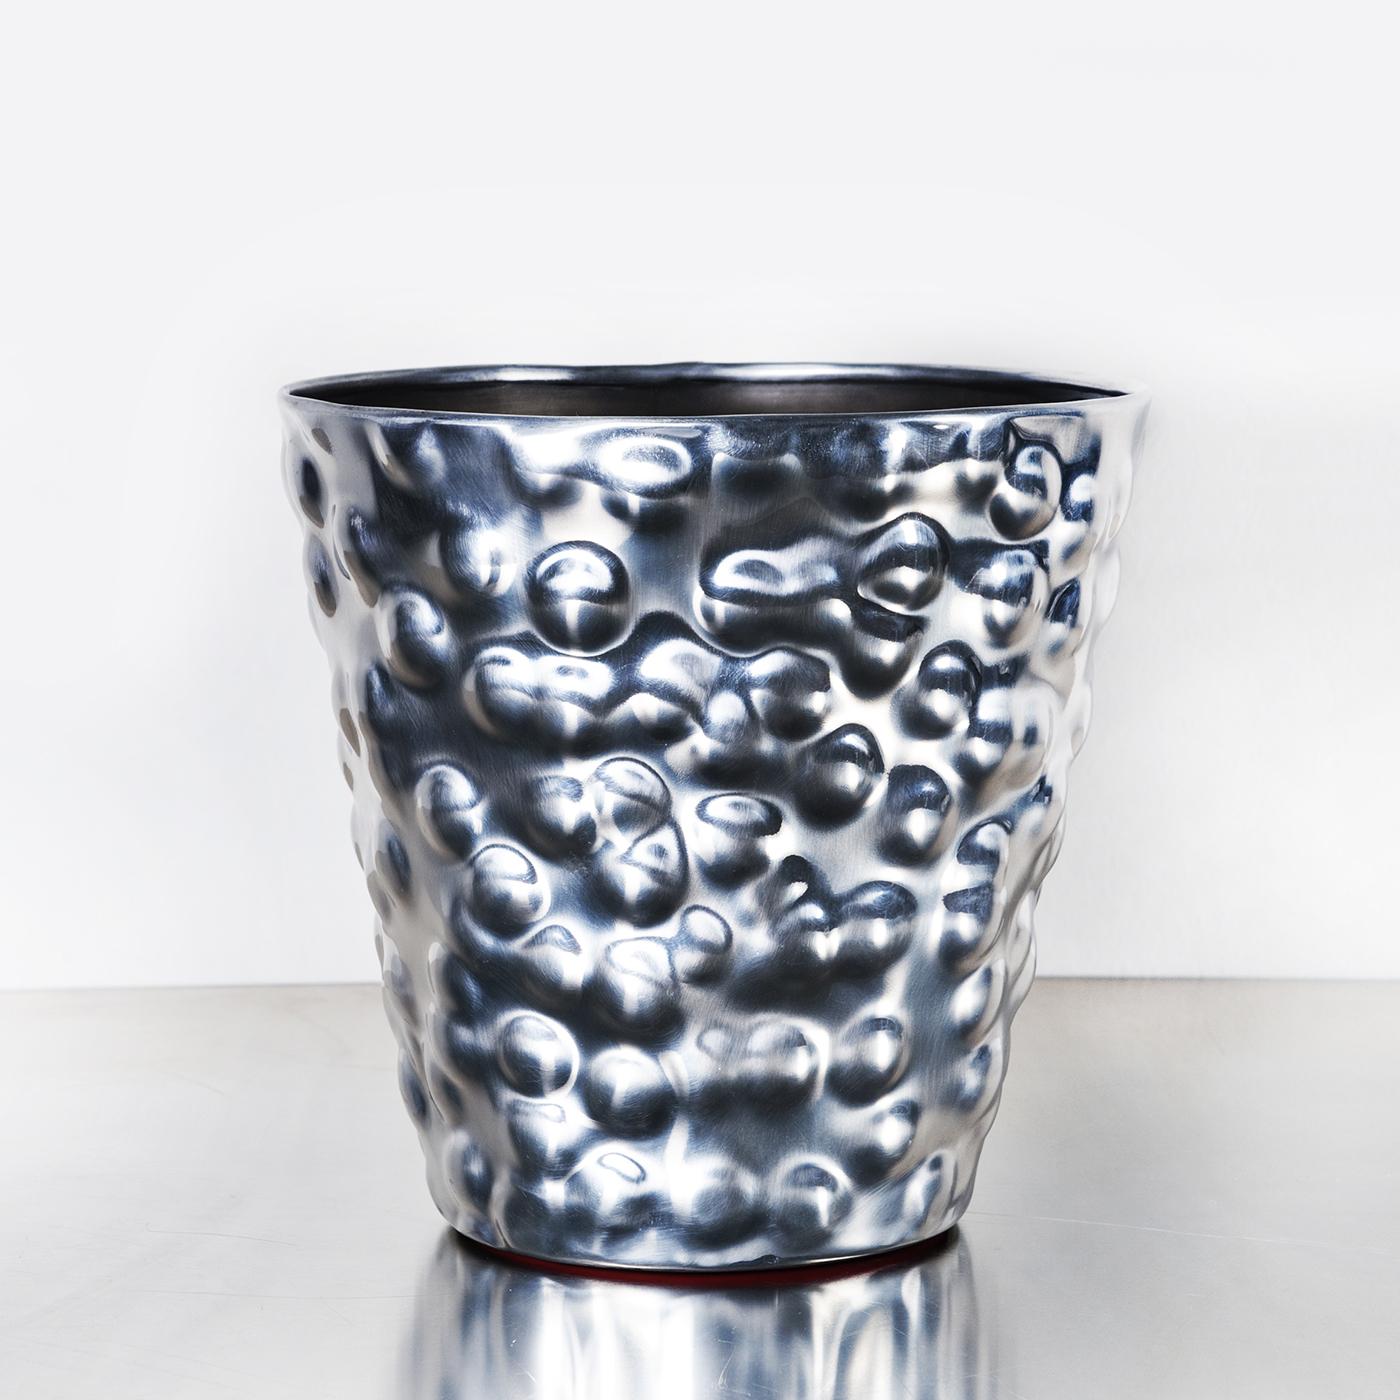 This intriguing ice bucket handcrafted by master car restorer Roberto Brandoli encapsulates the unique charm of luxury cars' frames. Part of the Brandoli Artwork Collection, its inner surface is fashioned of stainless steel to ensure perfect